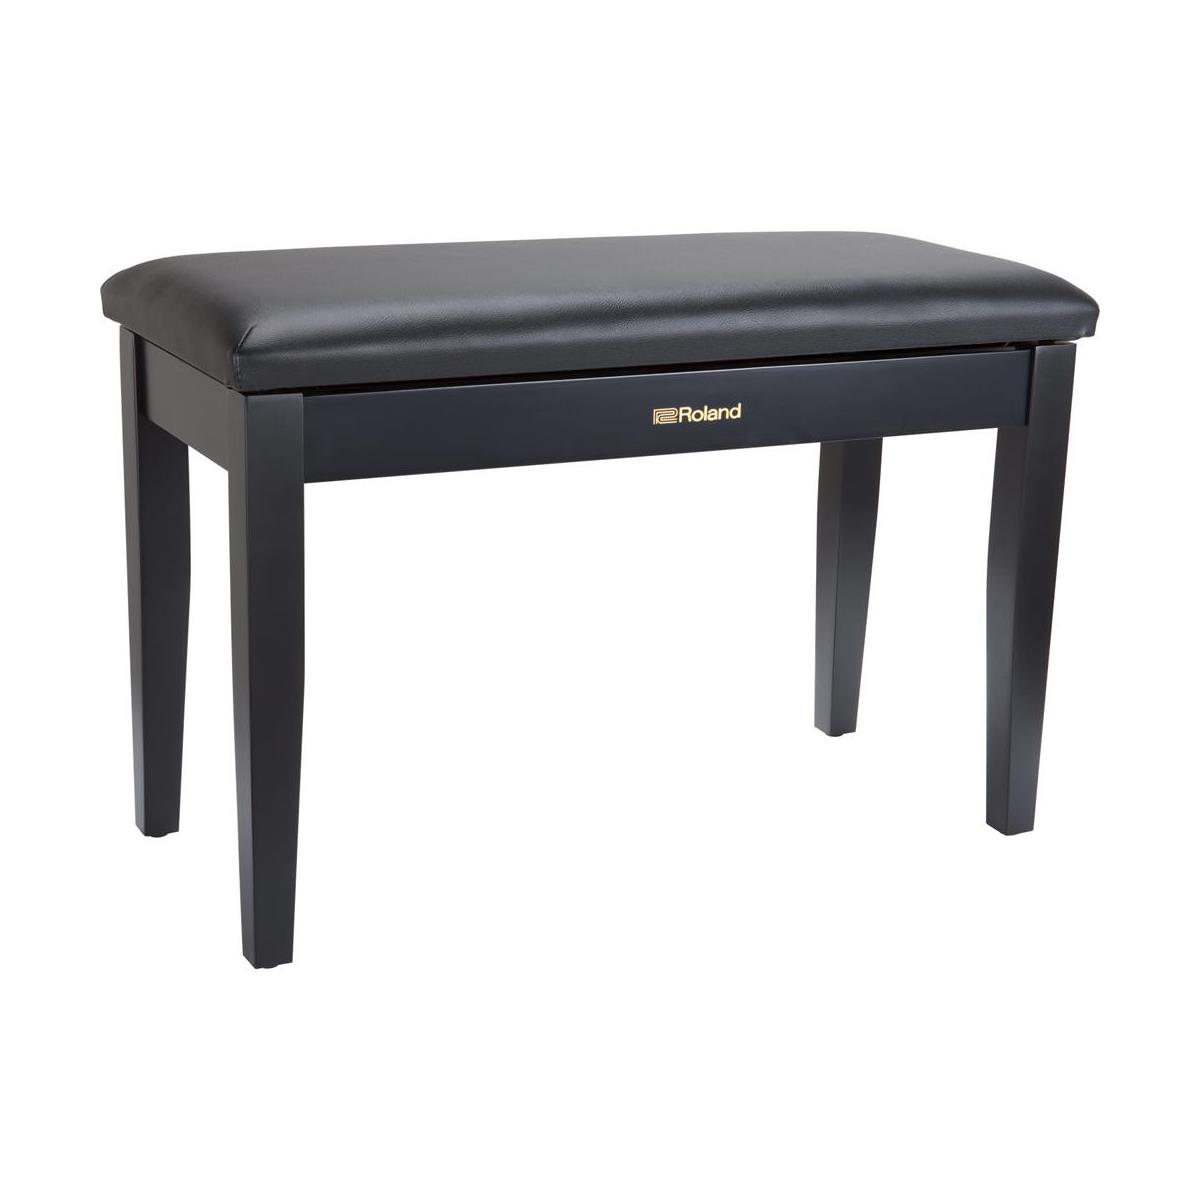 Image of Roland Duet Piano Bench with Cushioned Seat and Storage Compartment